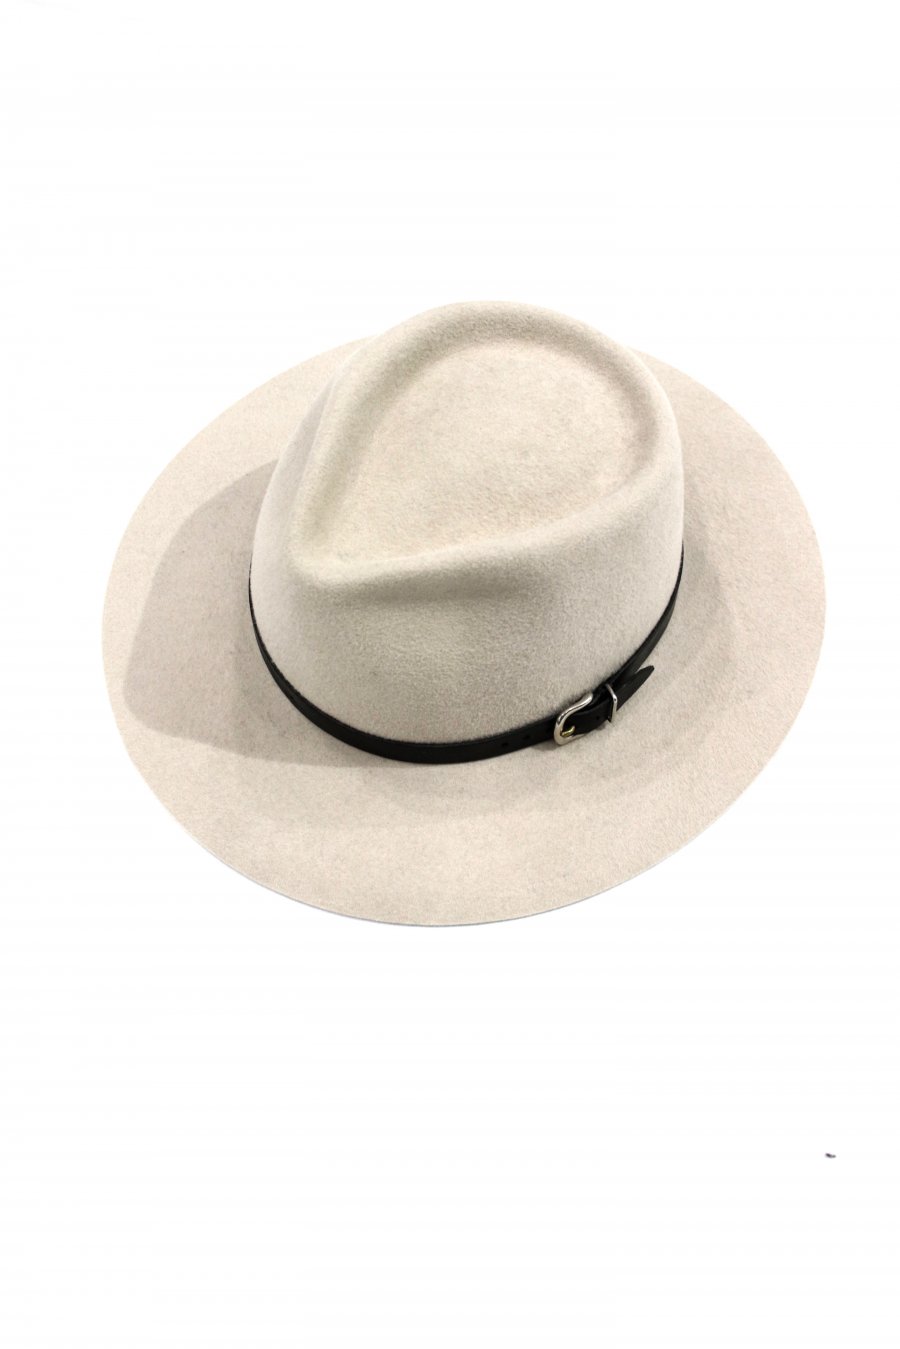 SOLARIS  RABBIT VELOR HAT-McKINLEY<img class='new_mark_img2' src='https://img.shop-pro.jp/img/new/icons15.gif' style='border:none;display:inline;margin:0px;padding:0px;width:auto;' />